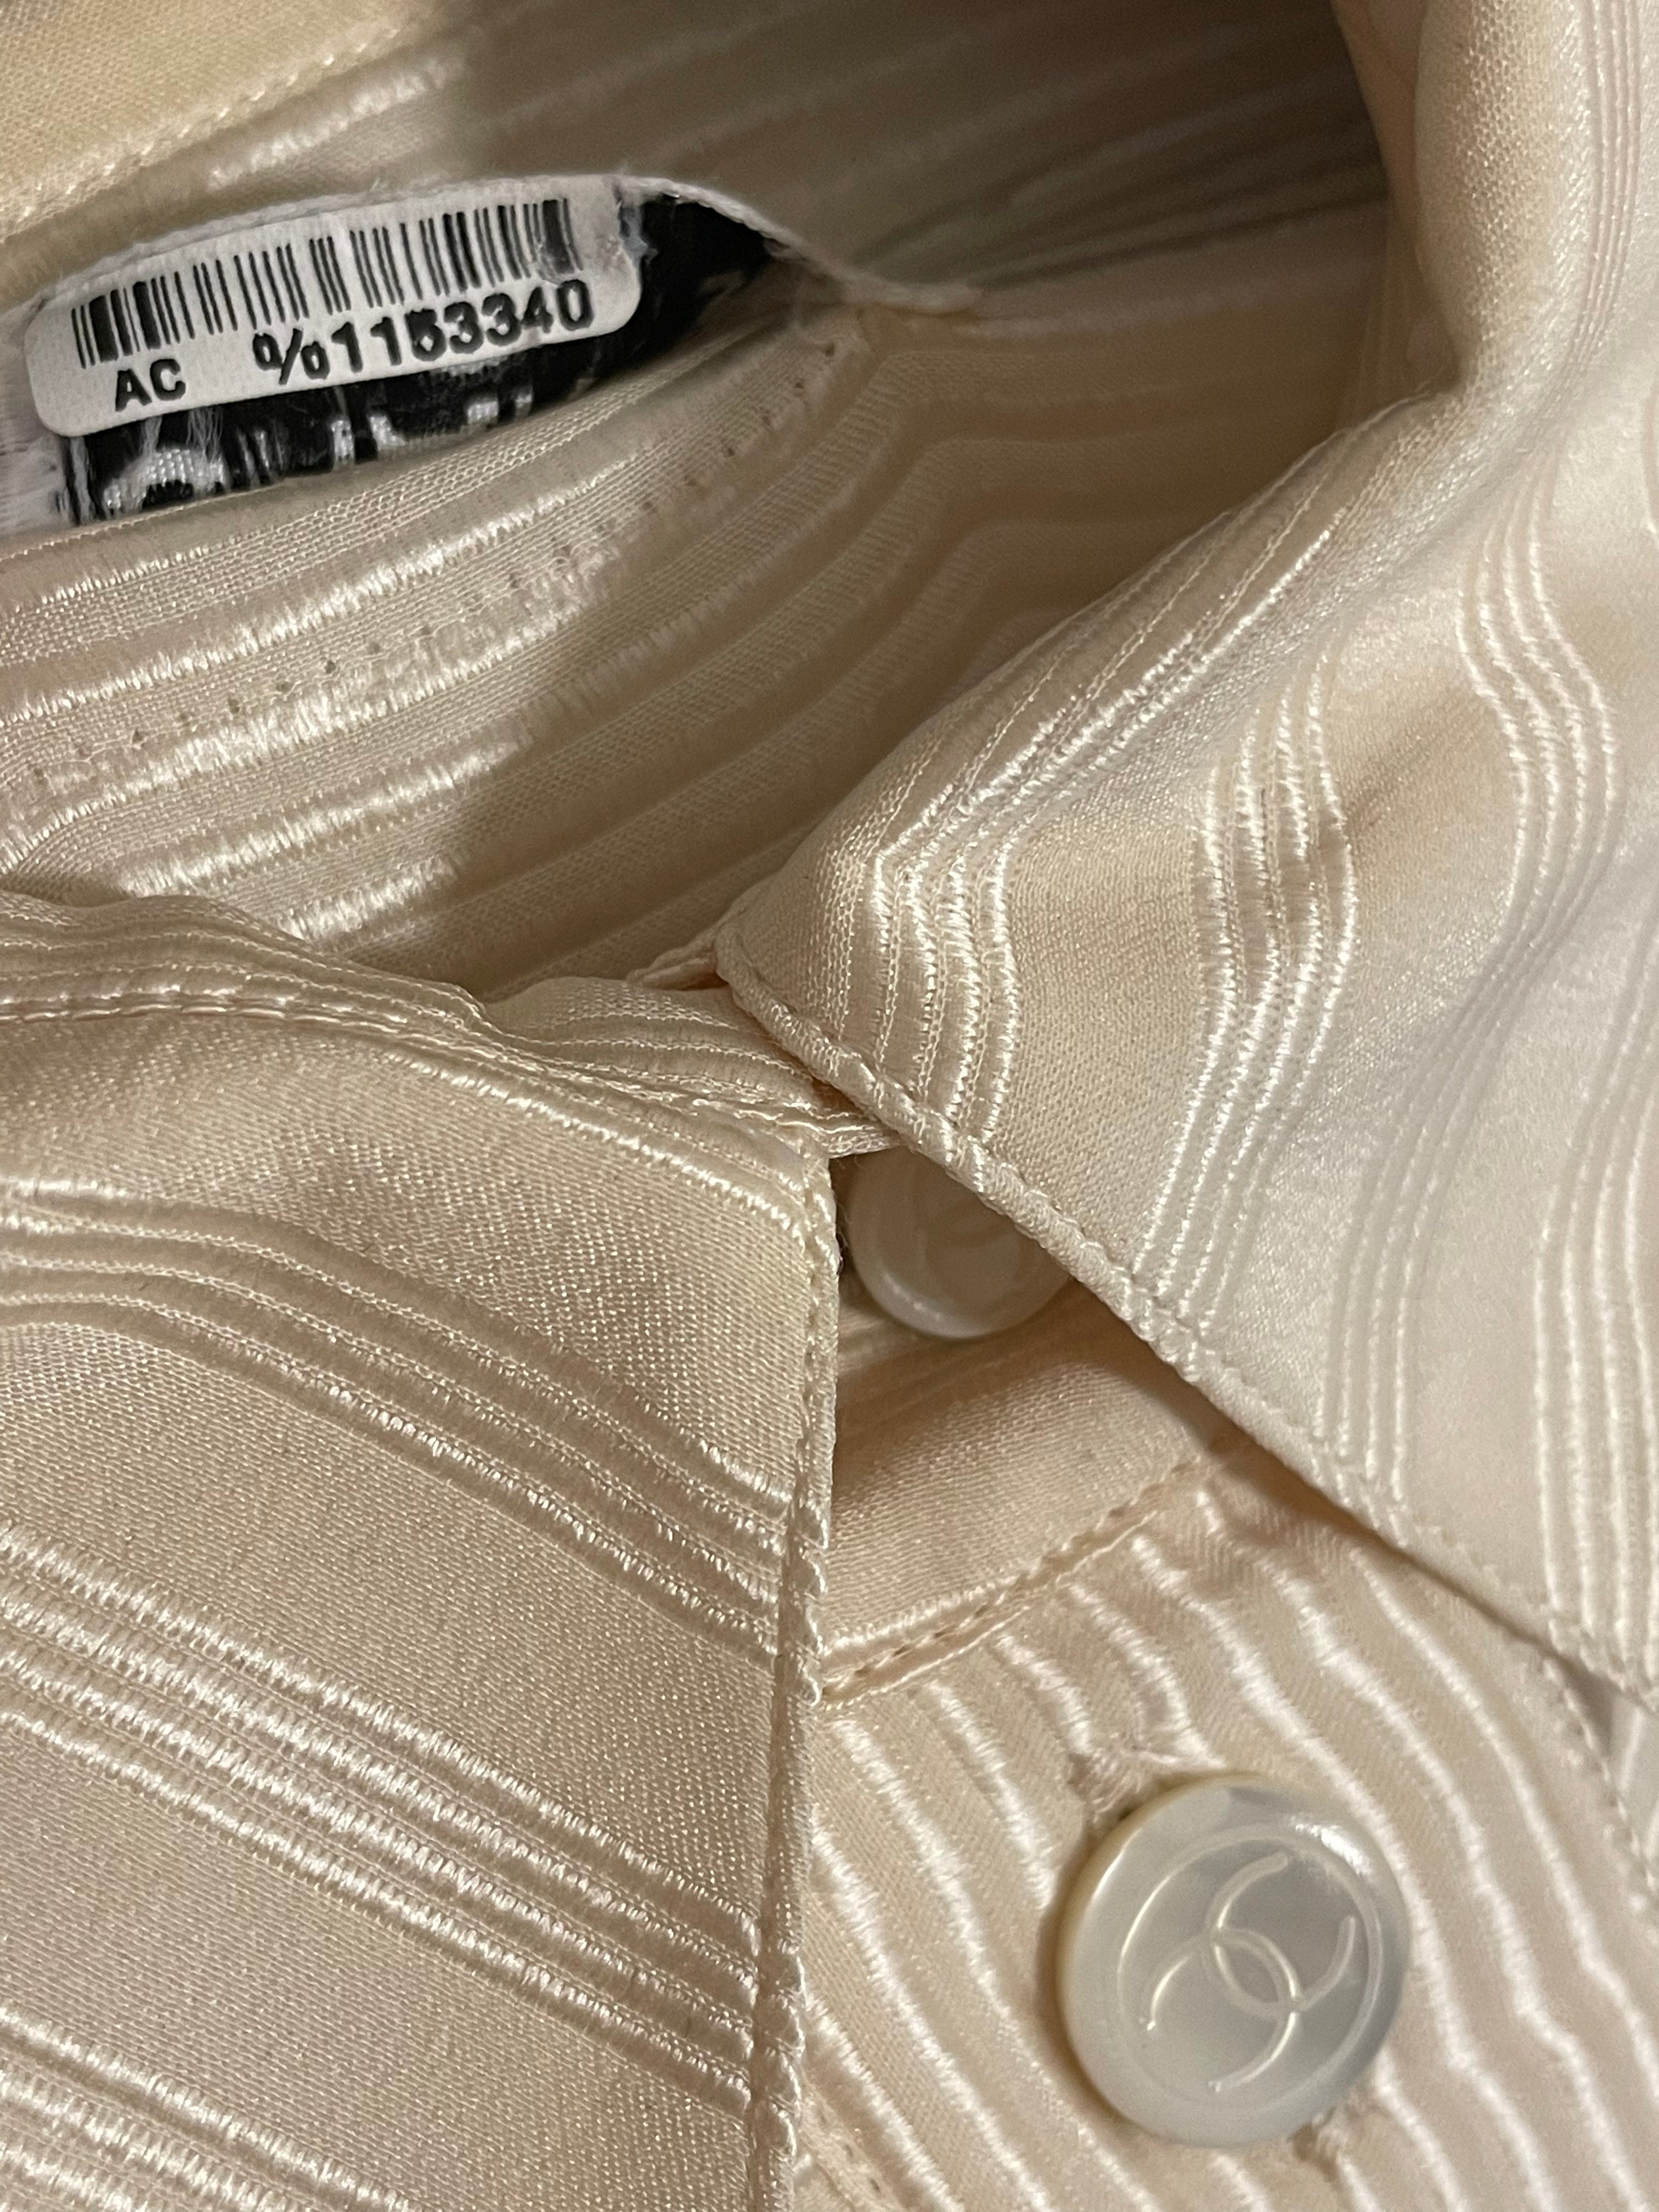 VINTAGE CHANEL  Women’s Tuxedo Button Down with French Cuffs